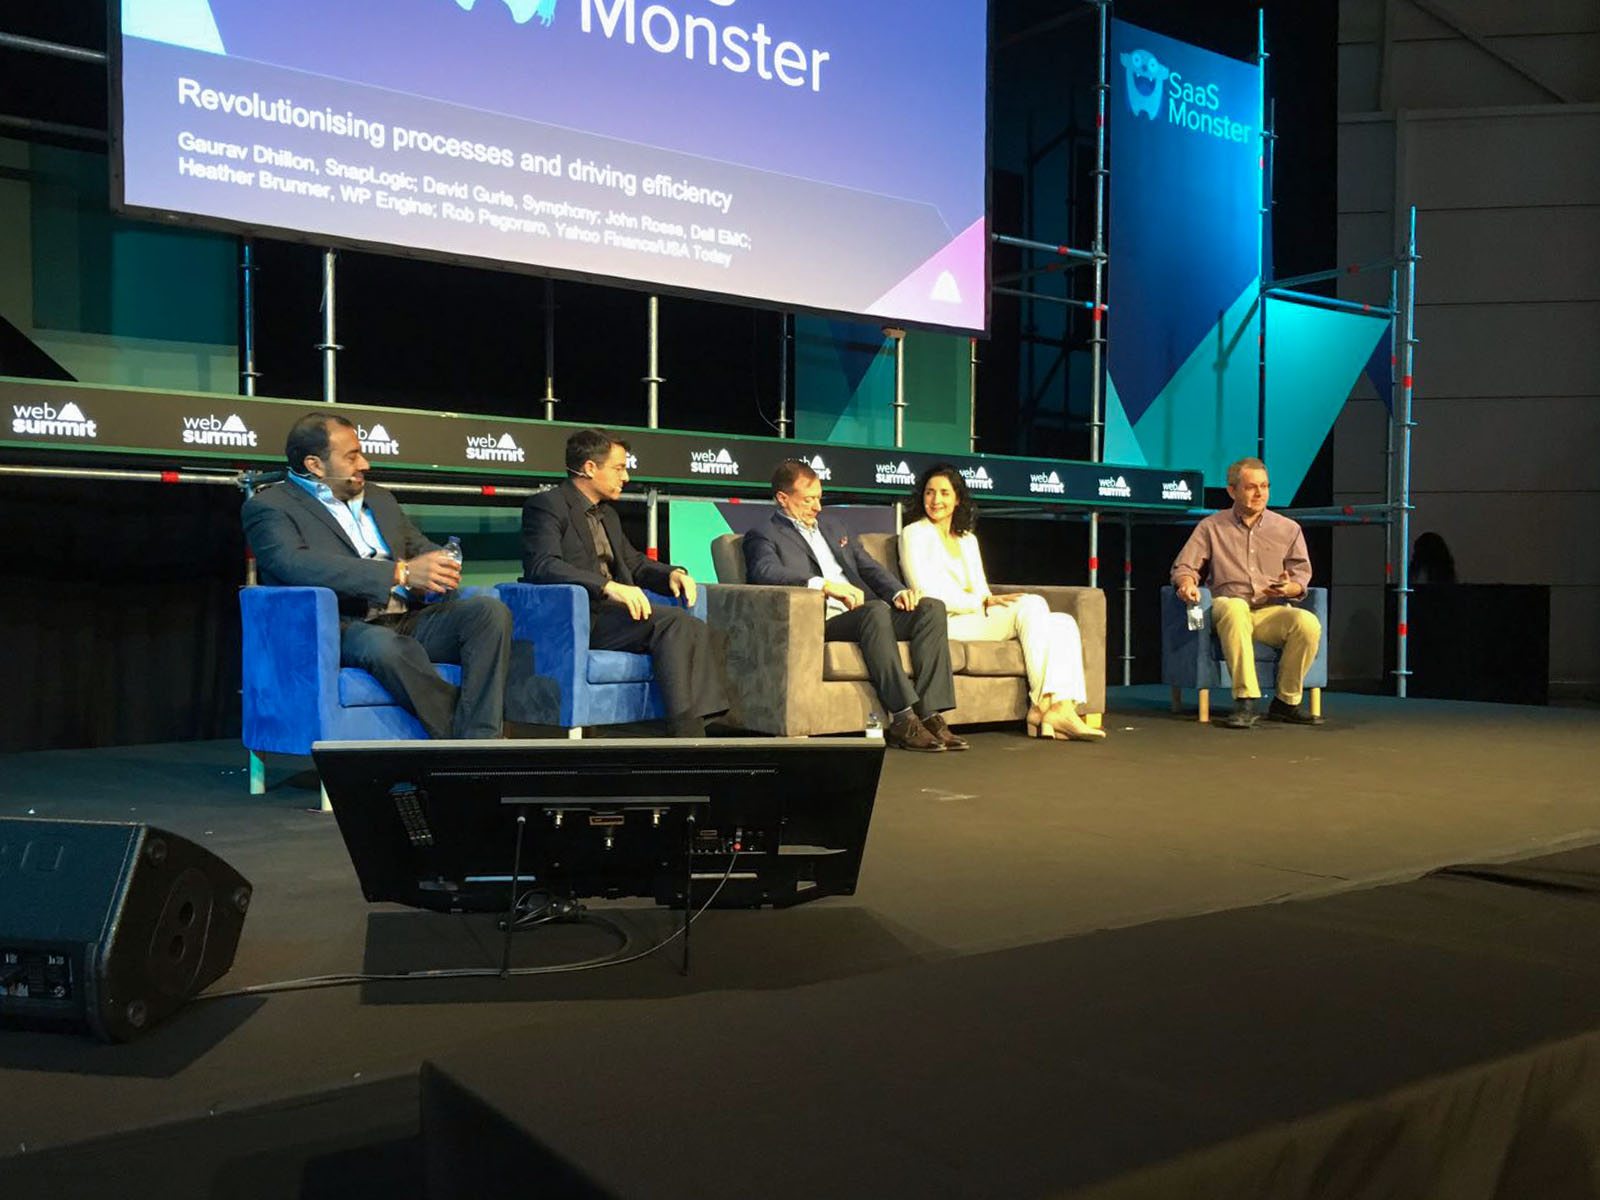 Heather Brunner’s Entrepreneurial Advice At Web Summit 2016